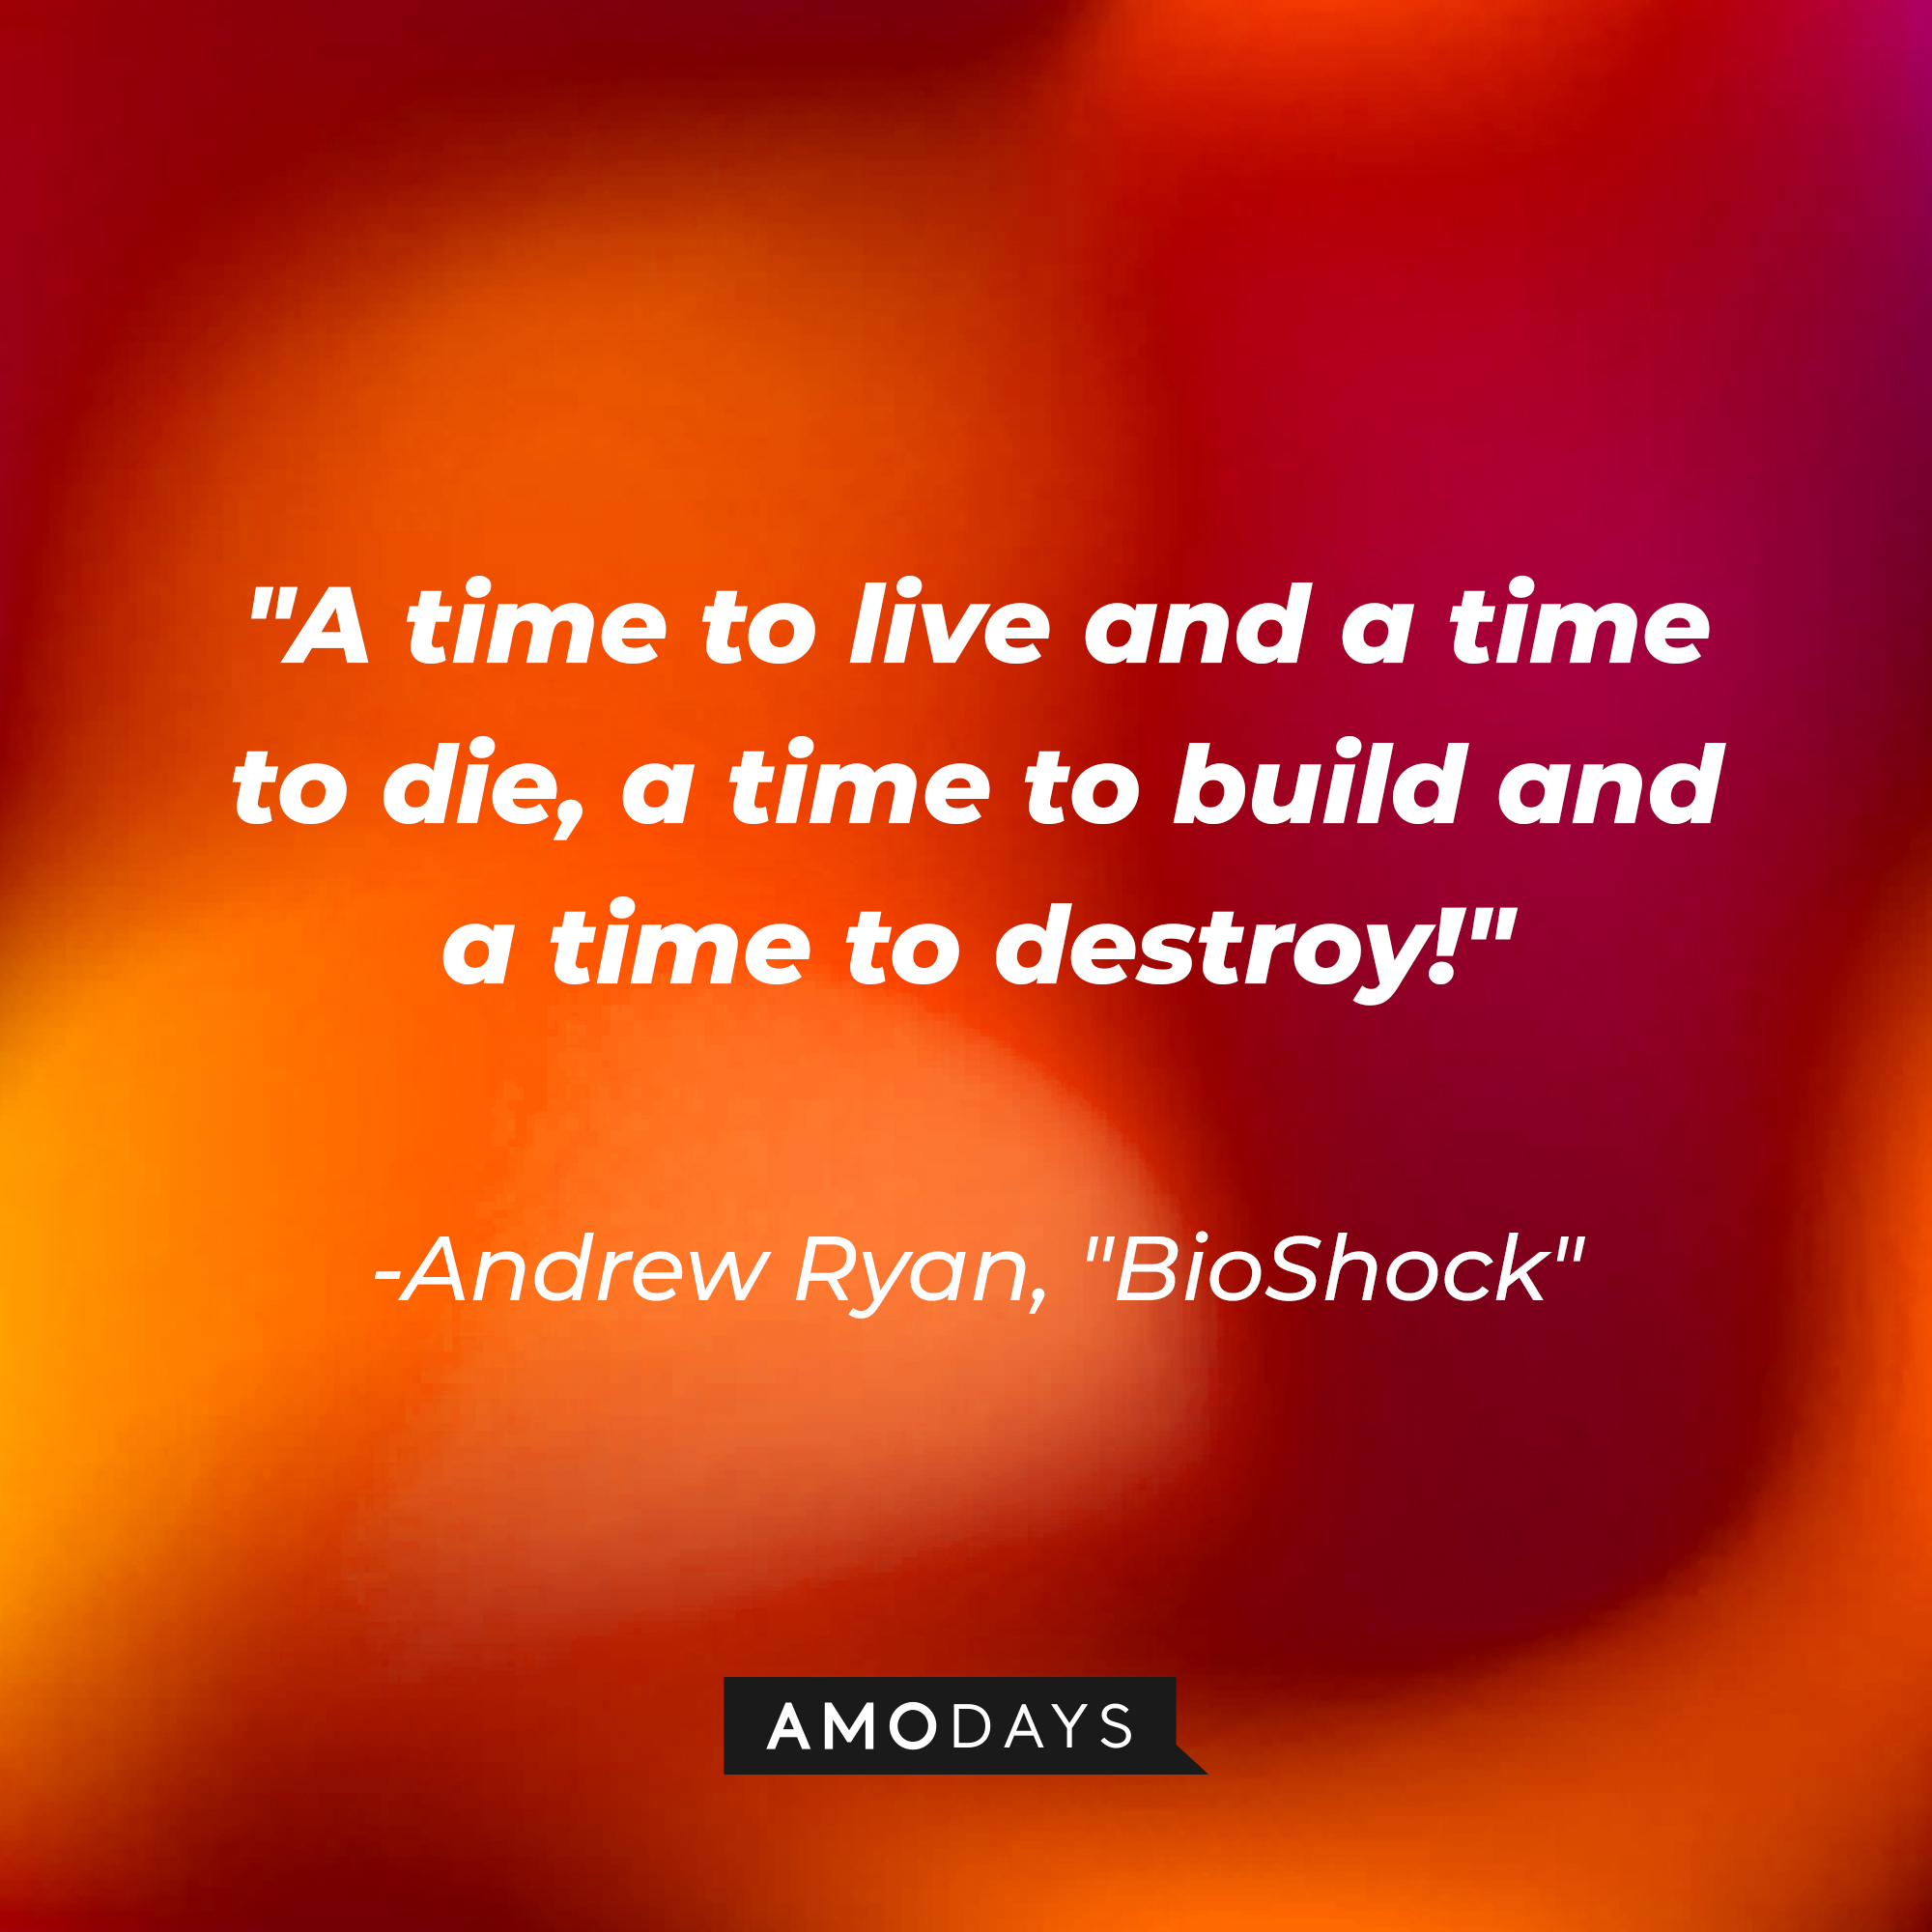 Andrew Ryan's quote from "BioShock:" "A time to live and a time to die, a time to build and a time to destroy!" | Source: AmoDays